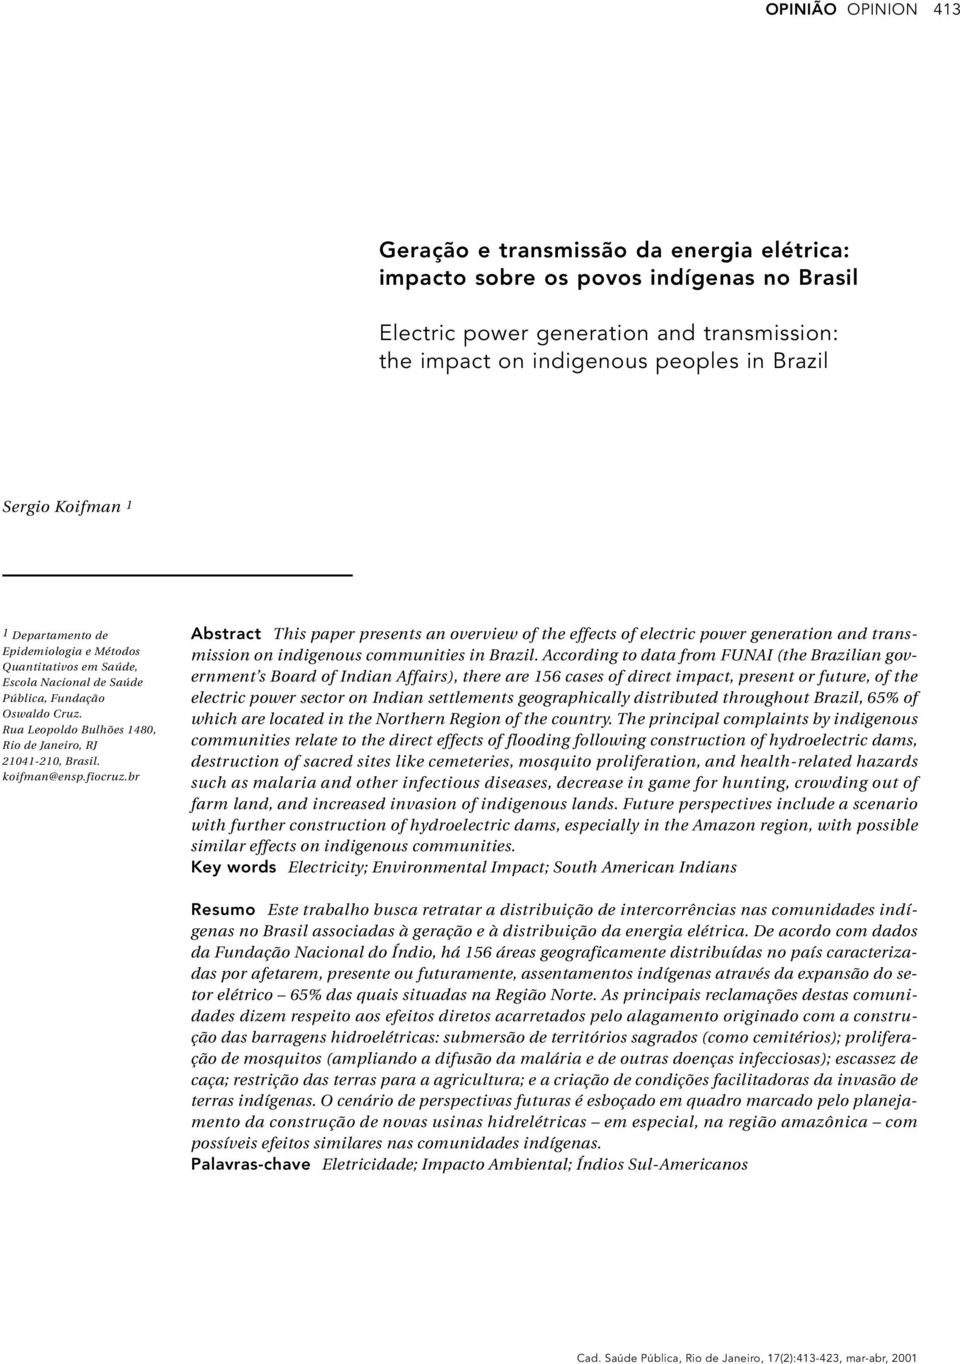 koifman@ensp.fiocruz.br Abstract This paper presents an overview of the effects of electric power generation and transmission on indigenous communities in Brazil.